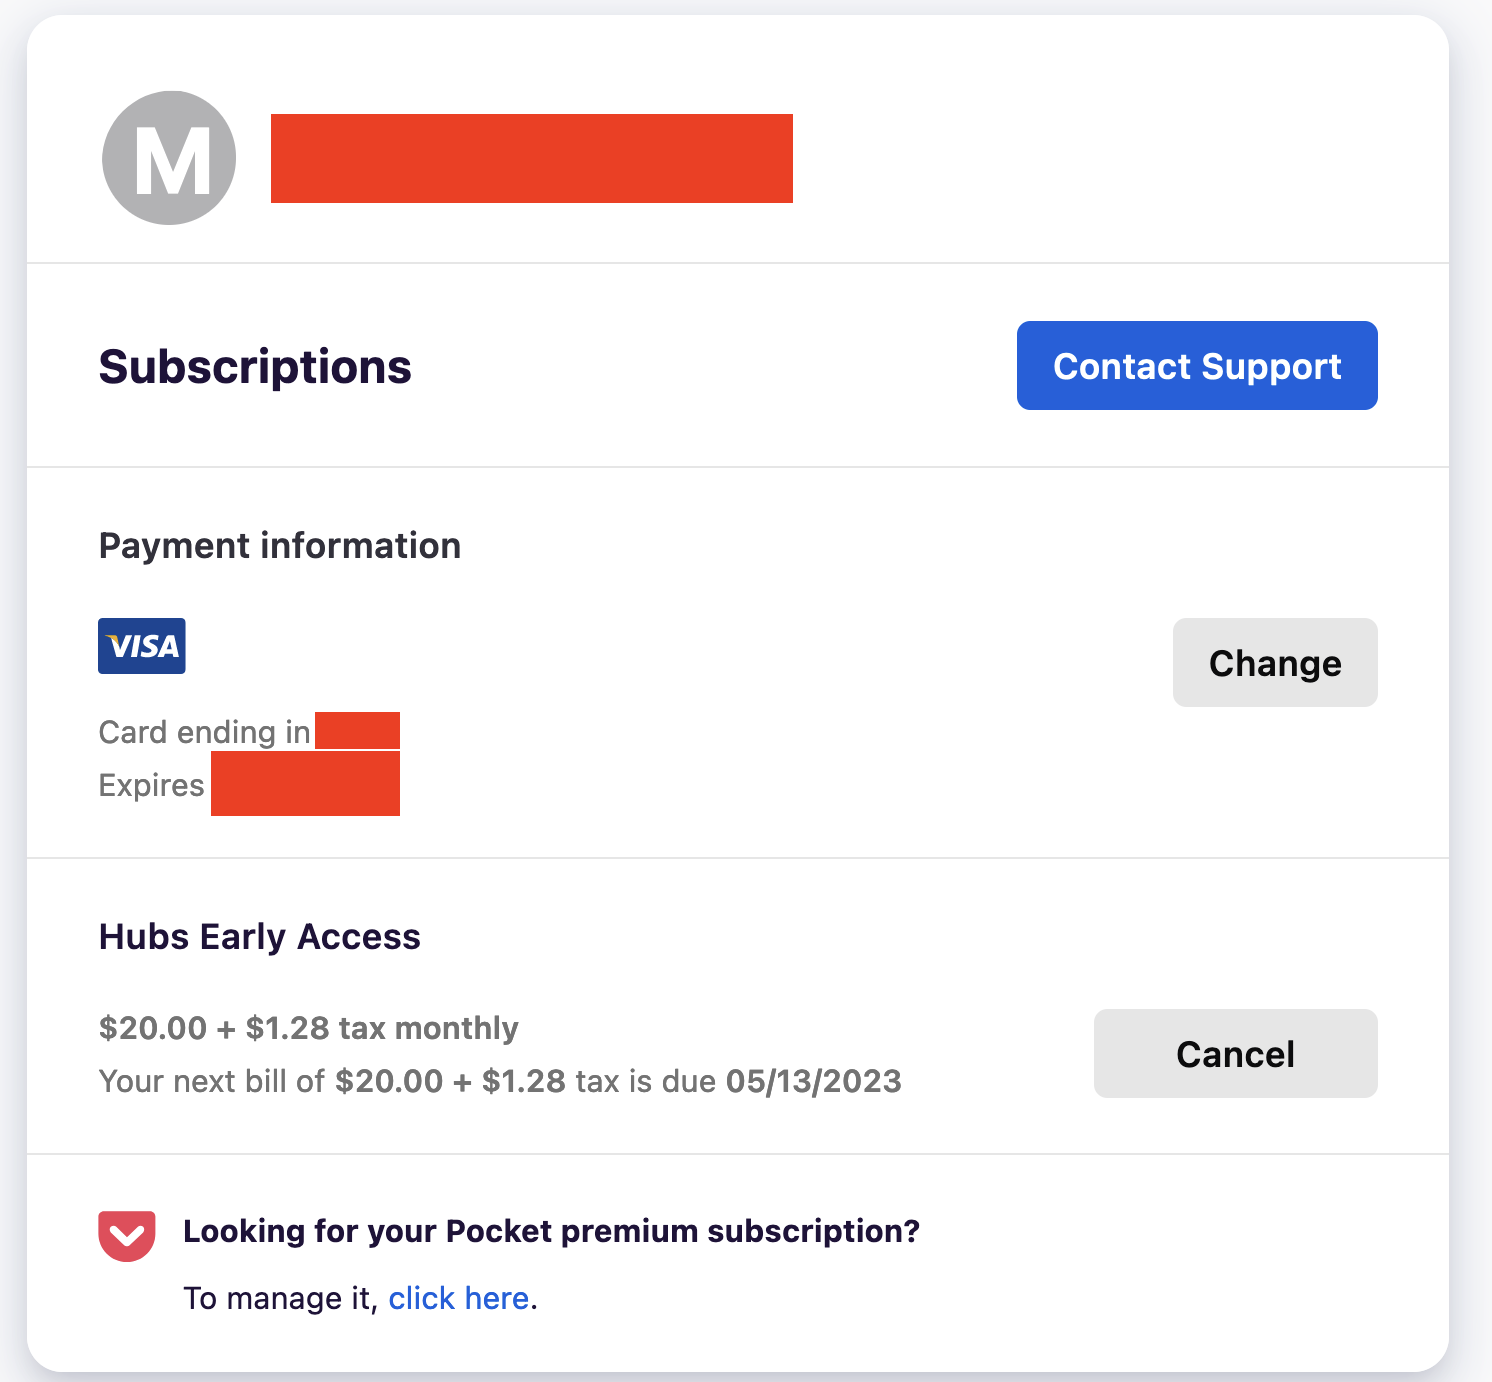 The subscription dashboard